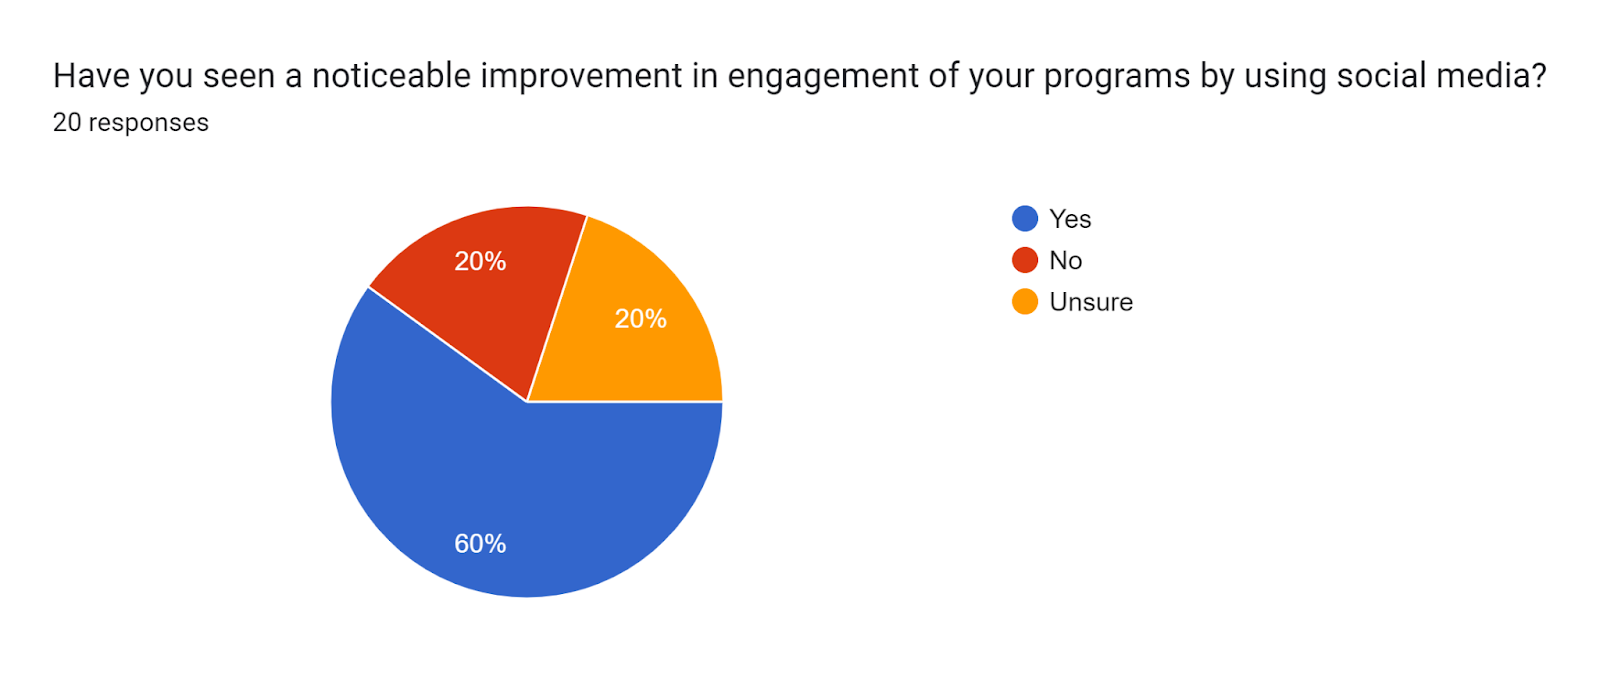 Forms response chart. Question title: Have you seen a noticeable improvement in engagement of your programs by using social media?. Number of responses: 20 responses.